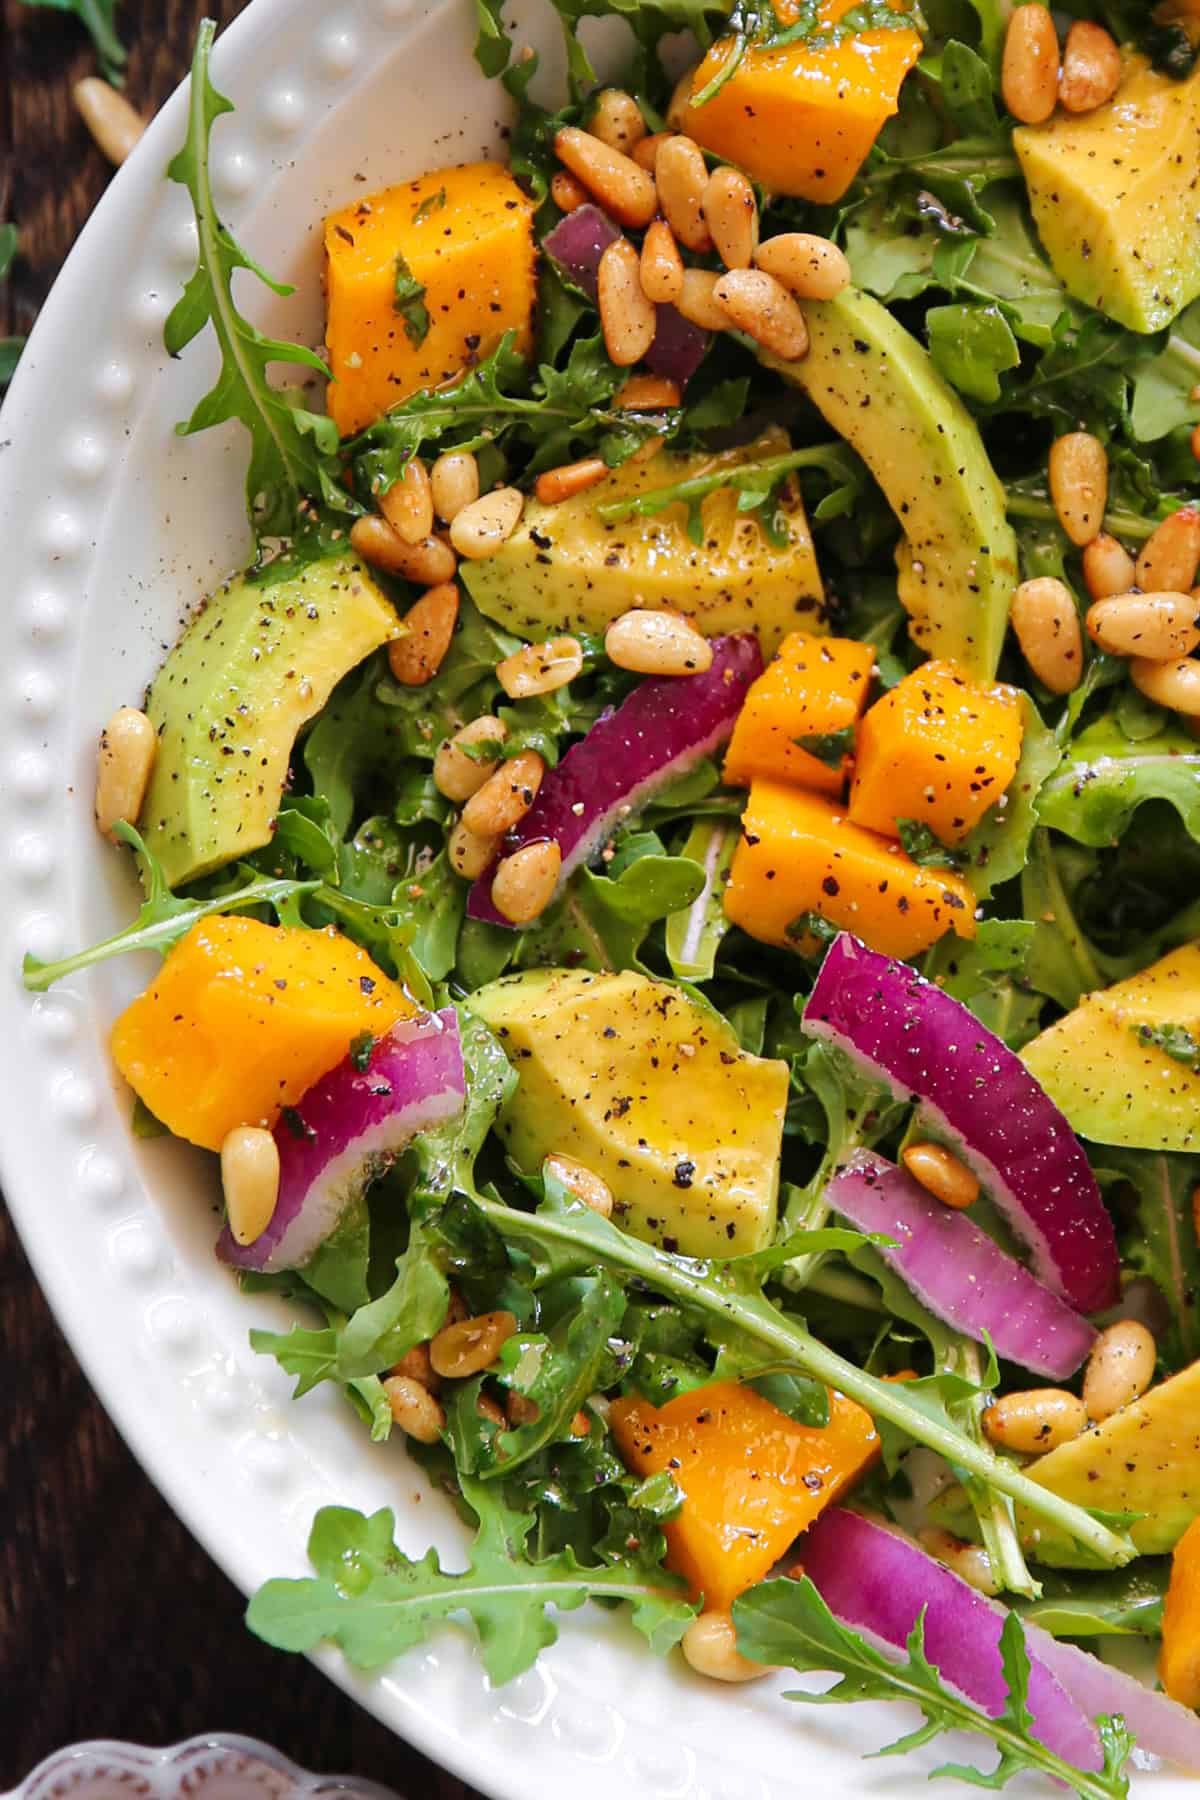 Avocado Mango Salad with Arugula, Pine Nuts and Honey Lime Dressing - in a white bowl.